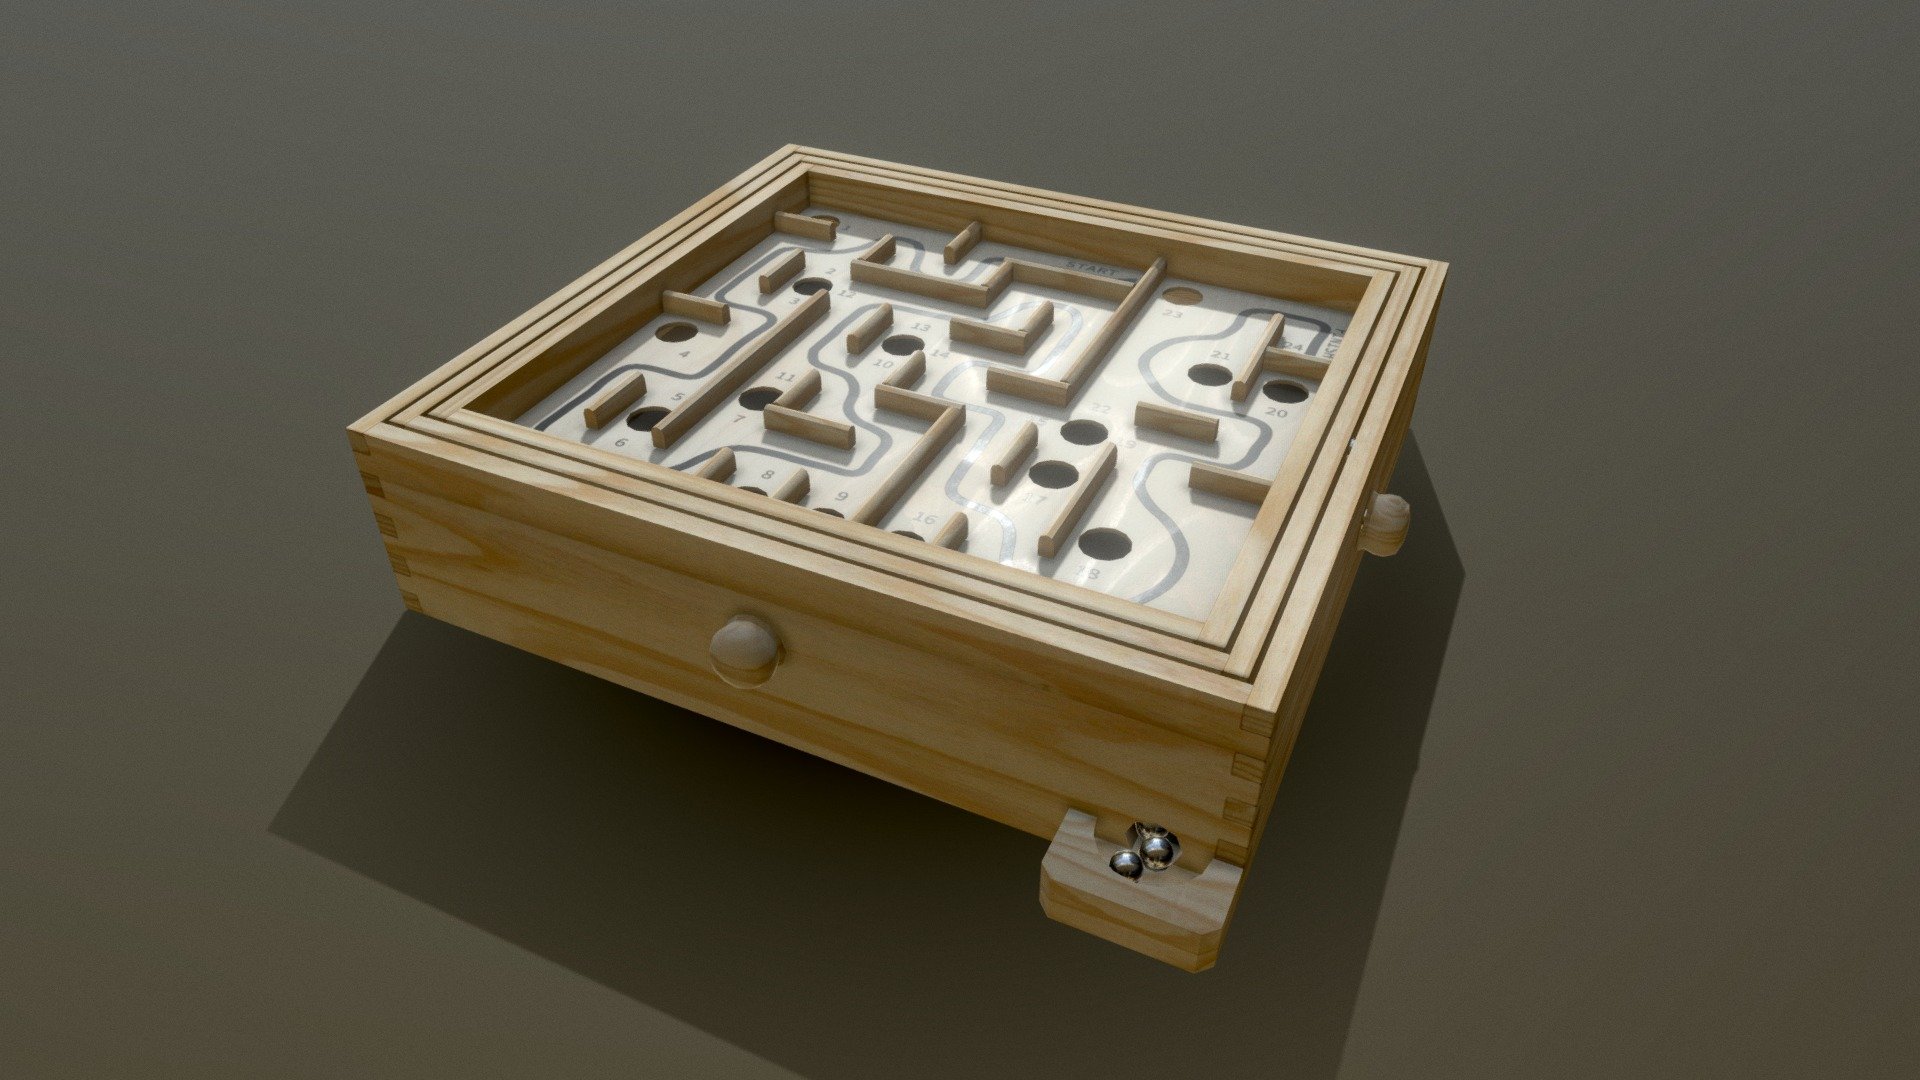 First submission for Sketchfab's 3December 2020. This is a replica of a classic marble labyrinth game

Tools used

Modelling/baking/animation in Blender
Texturing in GIMP
Textures sourced from Textures.com
 - 3December 2020 - Marble Labyrinth - Download Free 3D model by Jack Kelly (@slightlyintelligent) 3d model